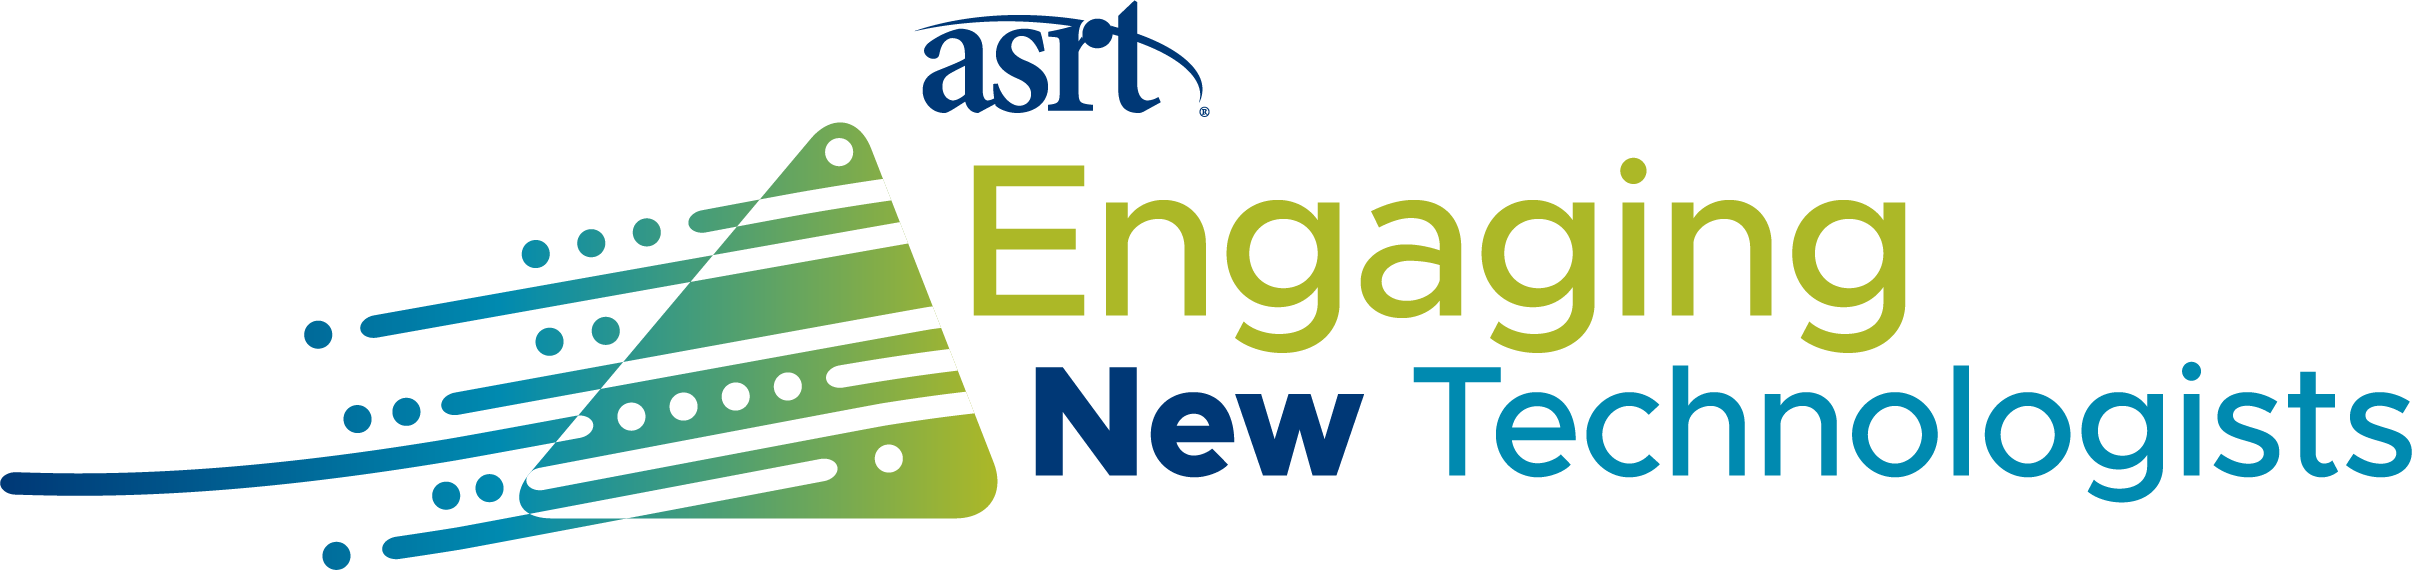 ASRT Engaging New Technologists